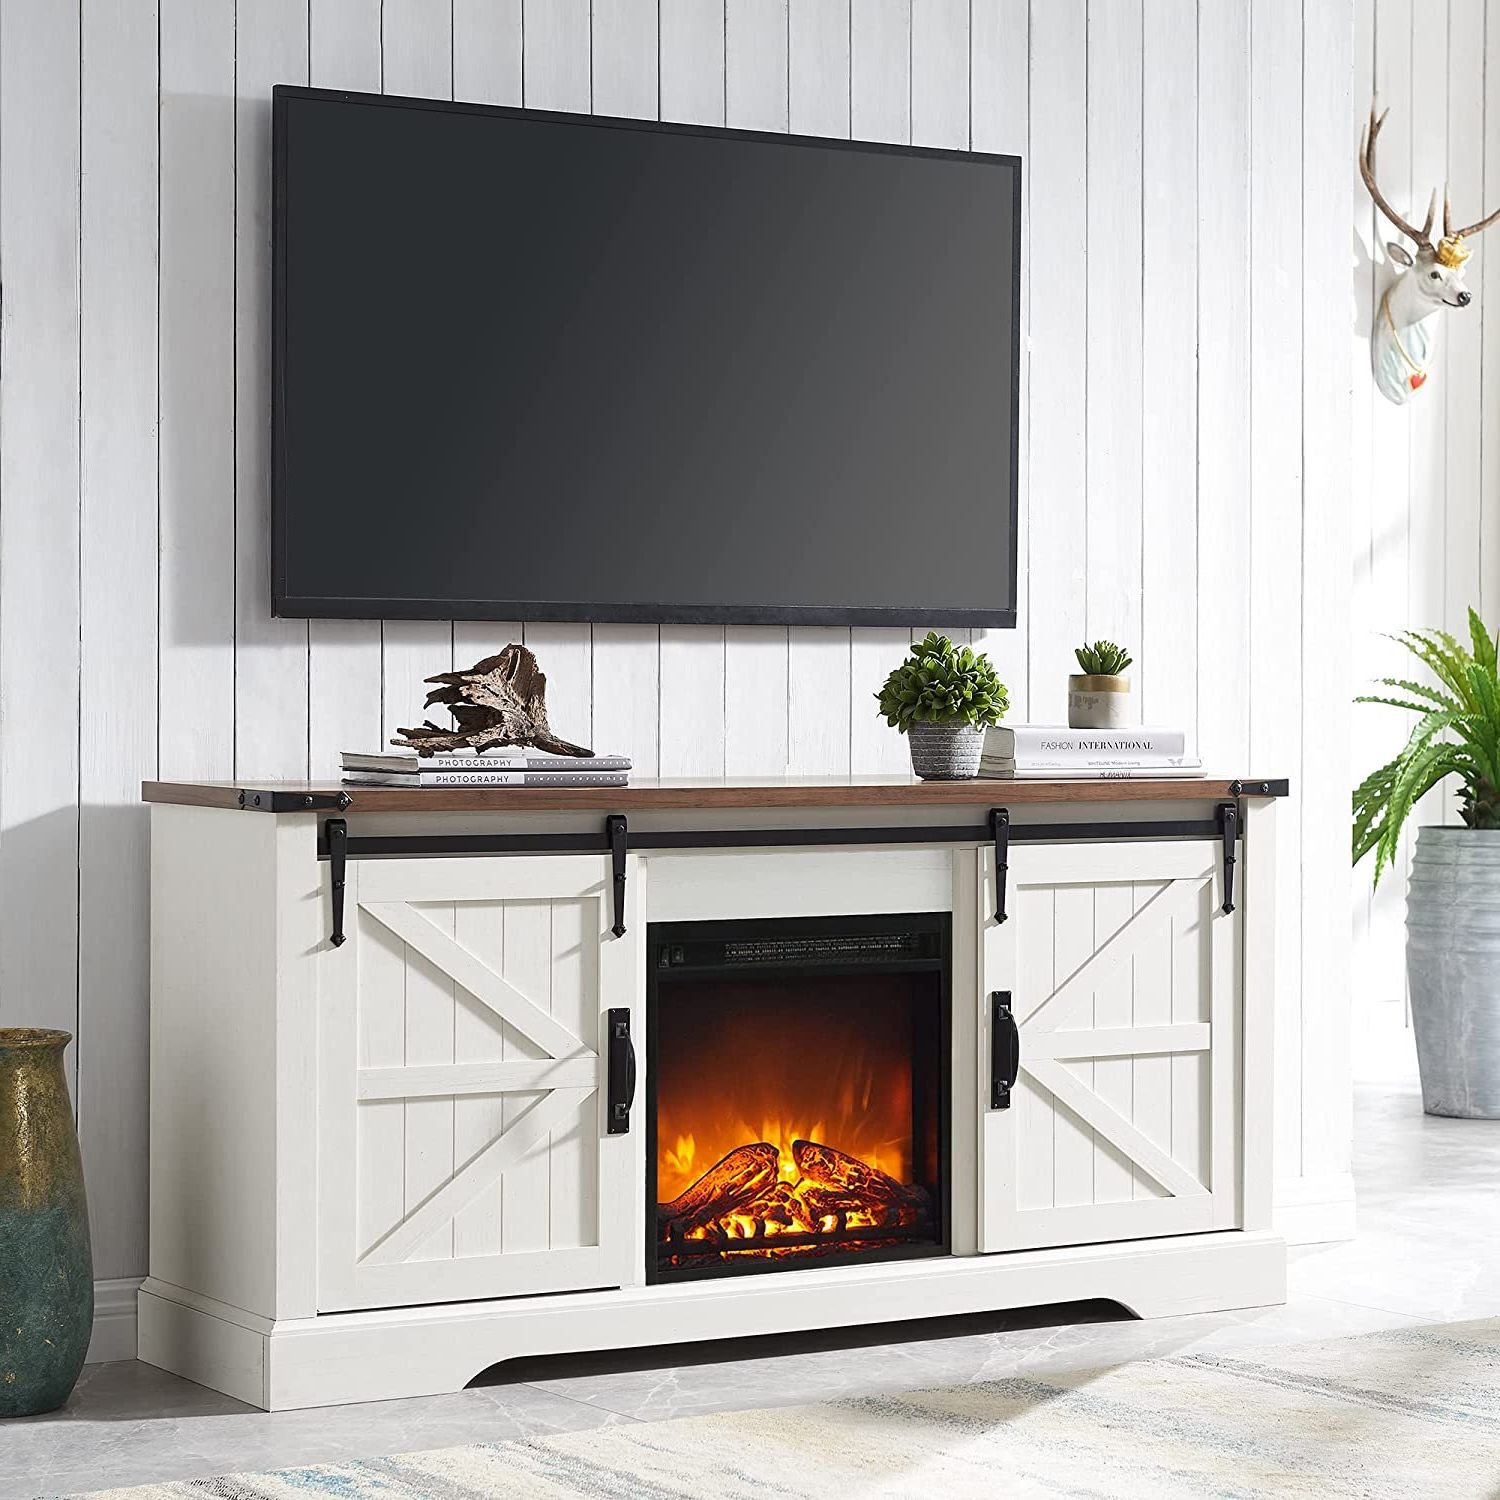 Gracie Oaks Farmhouse Tv Stand For 65 Inch Tv With 18" Electric Fireplace,  Sliding Barn Door, Adjustable Storage & Reviews | Wayfair For Farmhouse Stands With Shelves (View 13 of 20)